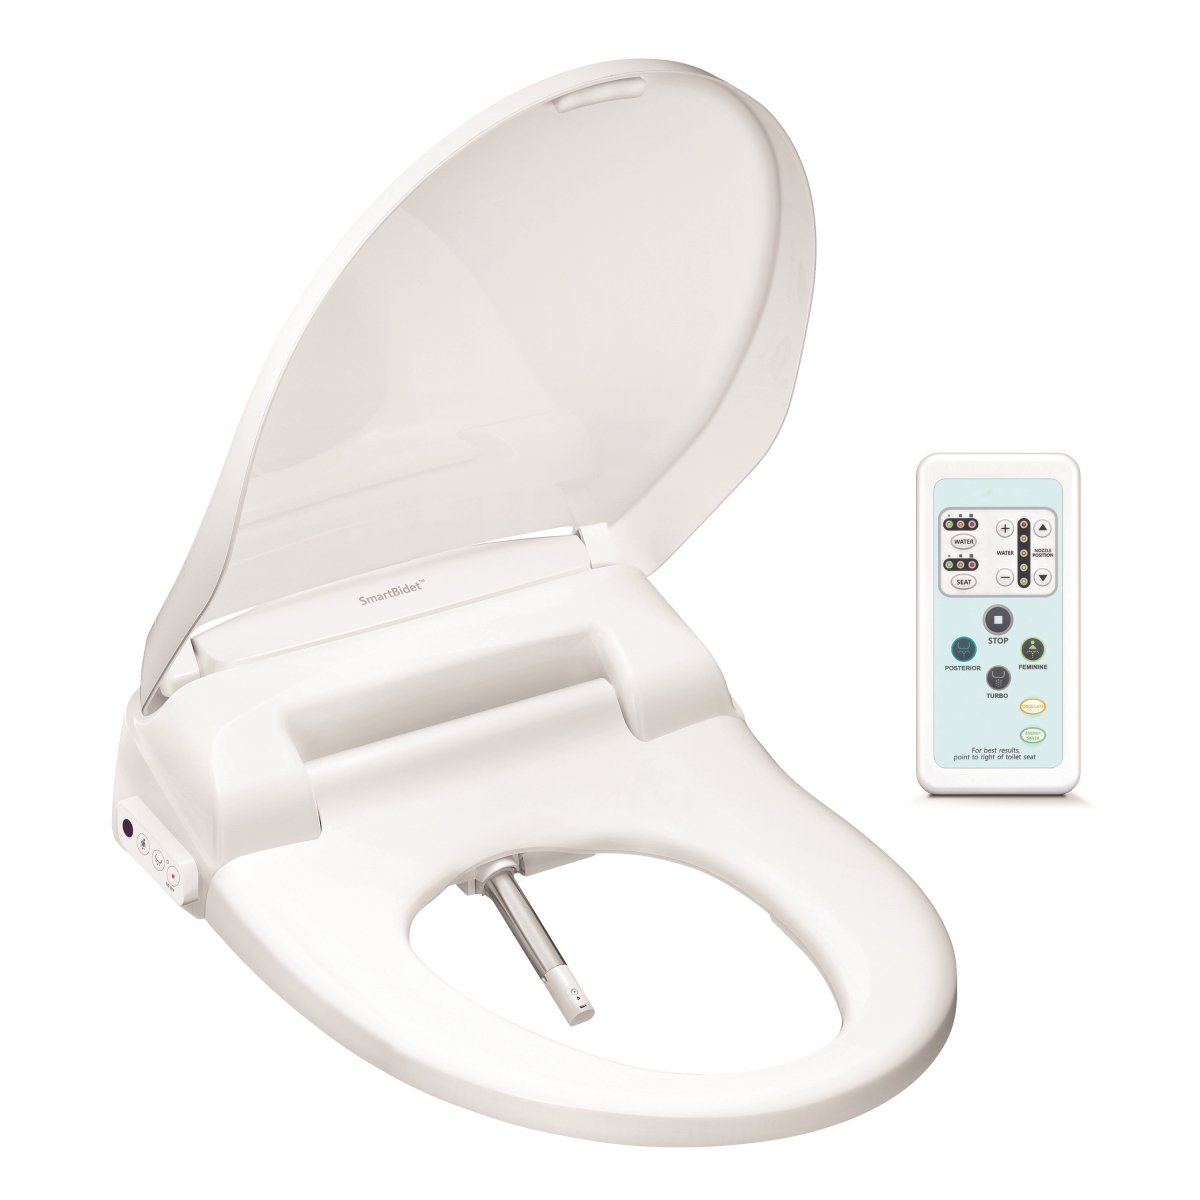 Smartbidet Sb-100r Electric Bidet Seat For Elongated Toilets With Remote Control, Stainless Steel Self-cleansing Nozzle